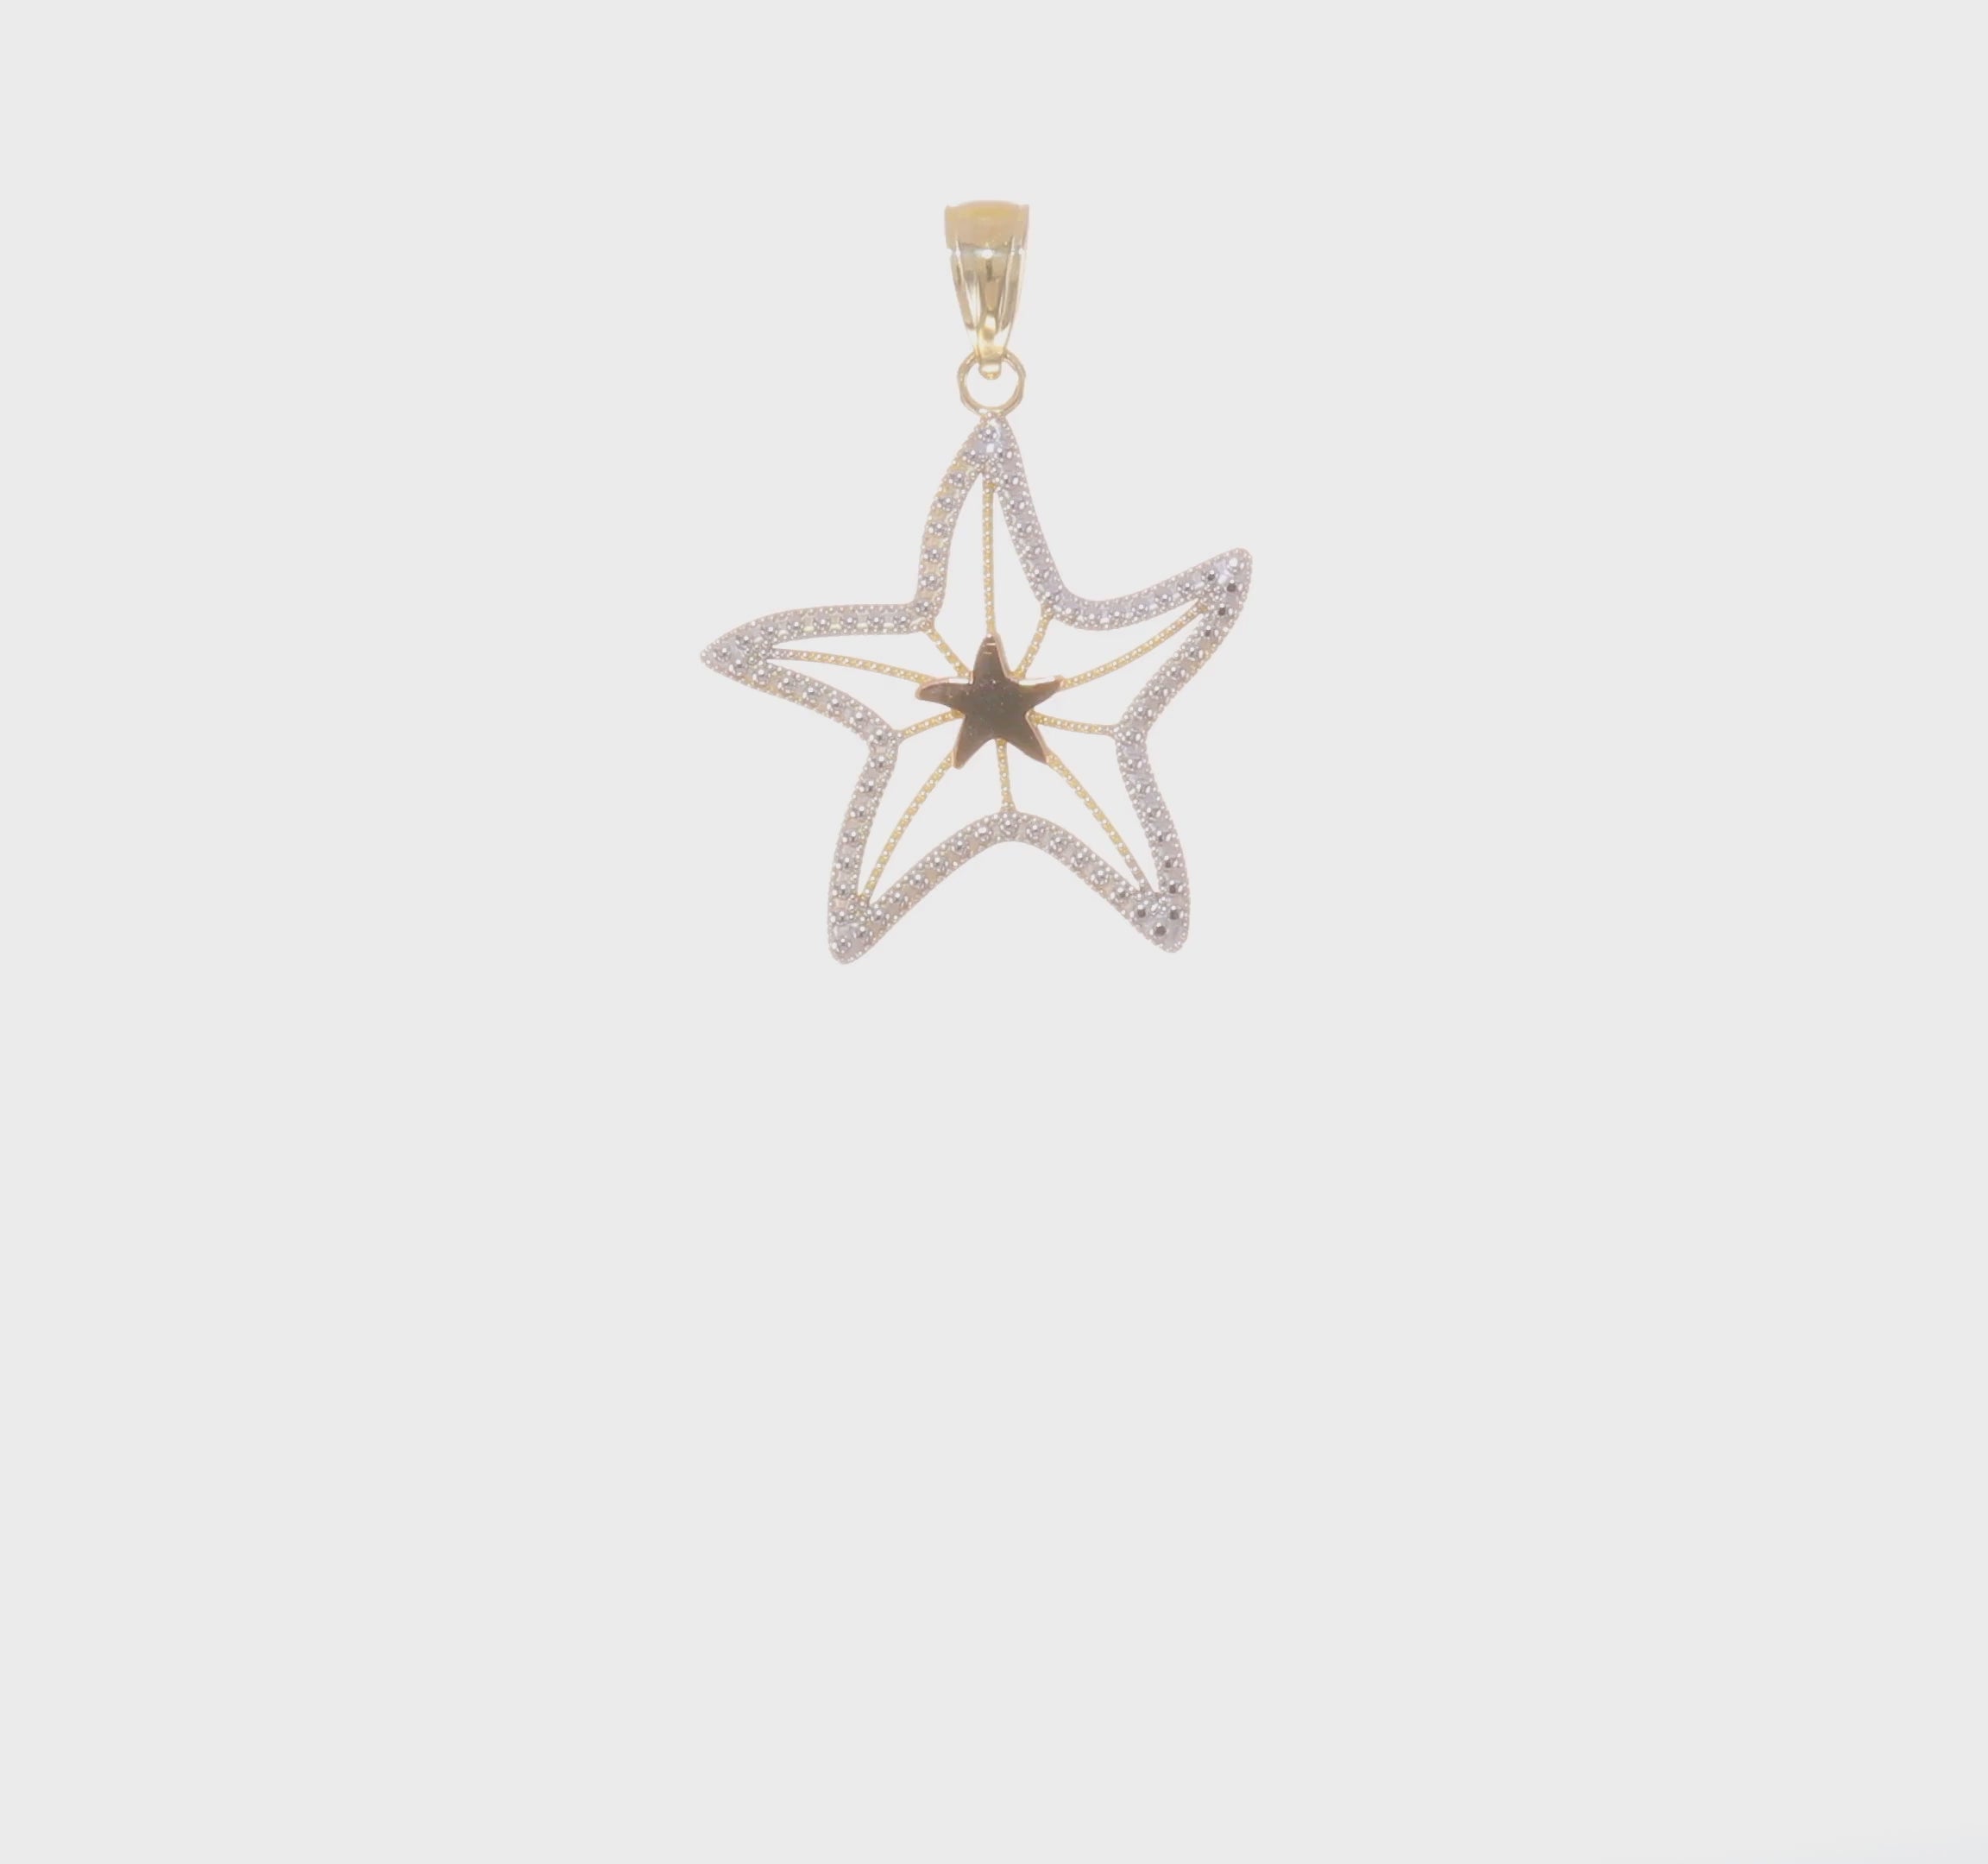 14K Two-Tone with White Rhodium Cut-Out Small Starfish Charm Pendant